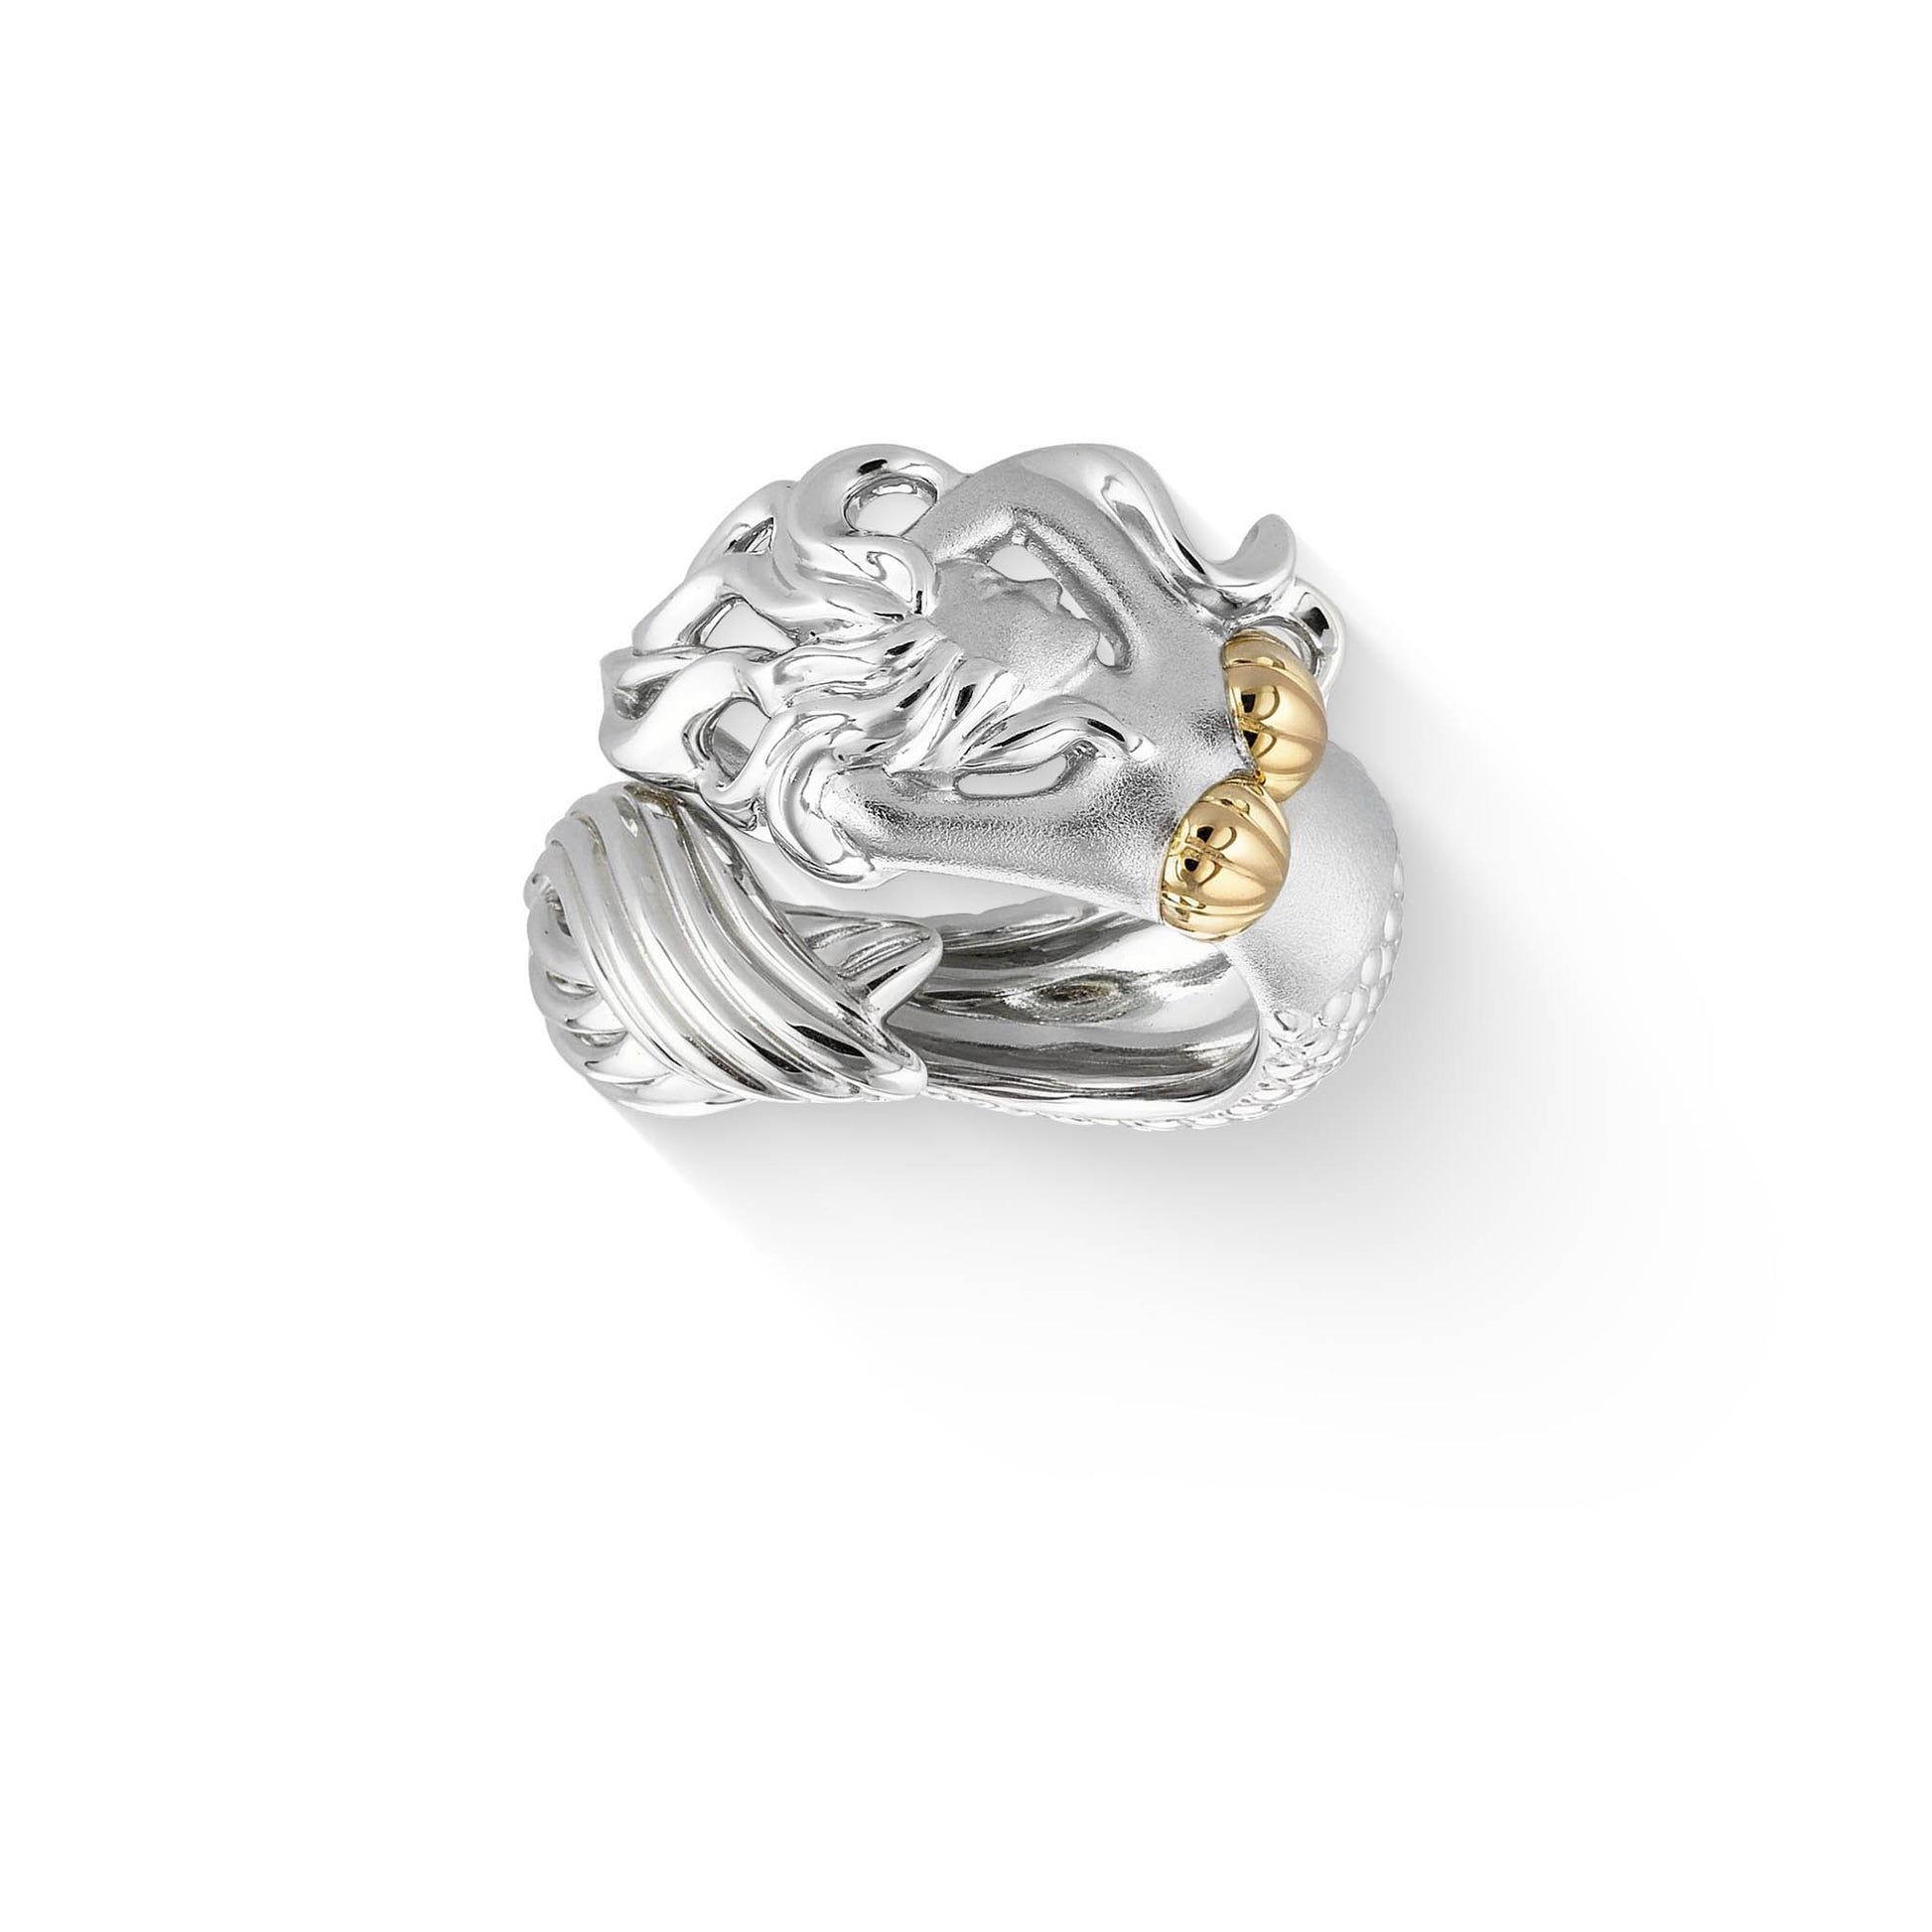 44828 - 14K Yellow Gold and Sterling Silver - Mermaid Ring